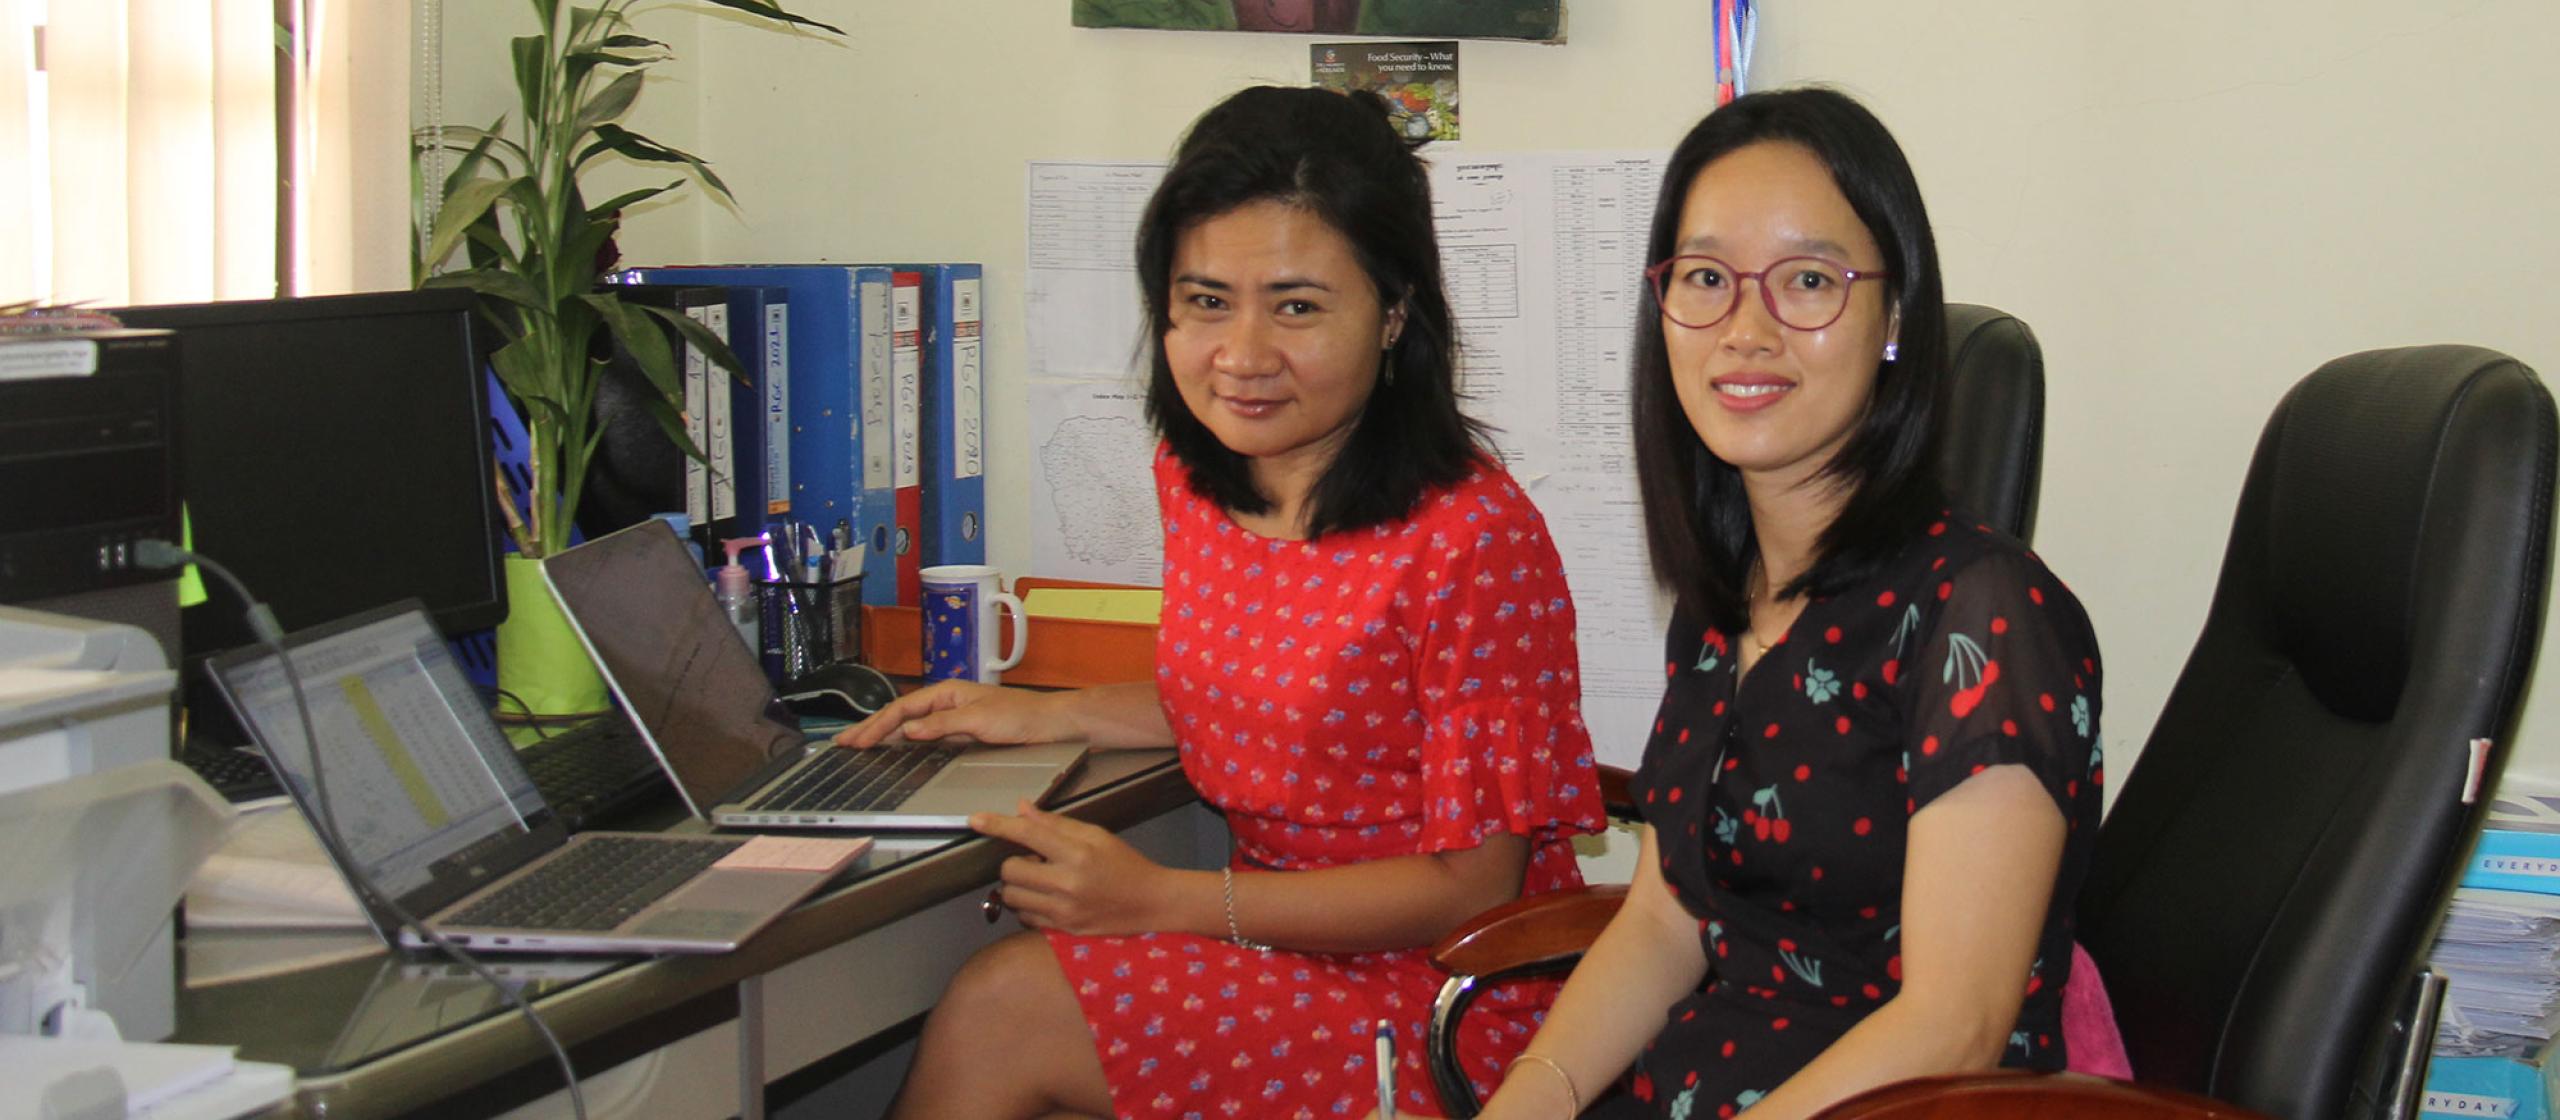 Awardee Sonthida Sambath and her colleague Lim Sophornthida, Cambodia, working together on the small project proposal